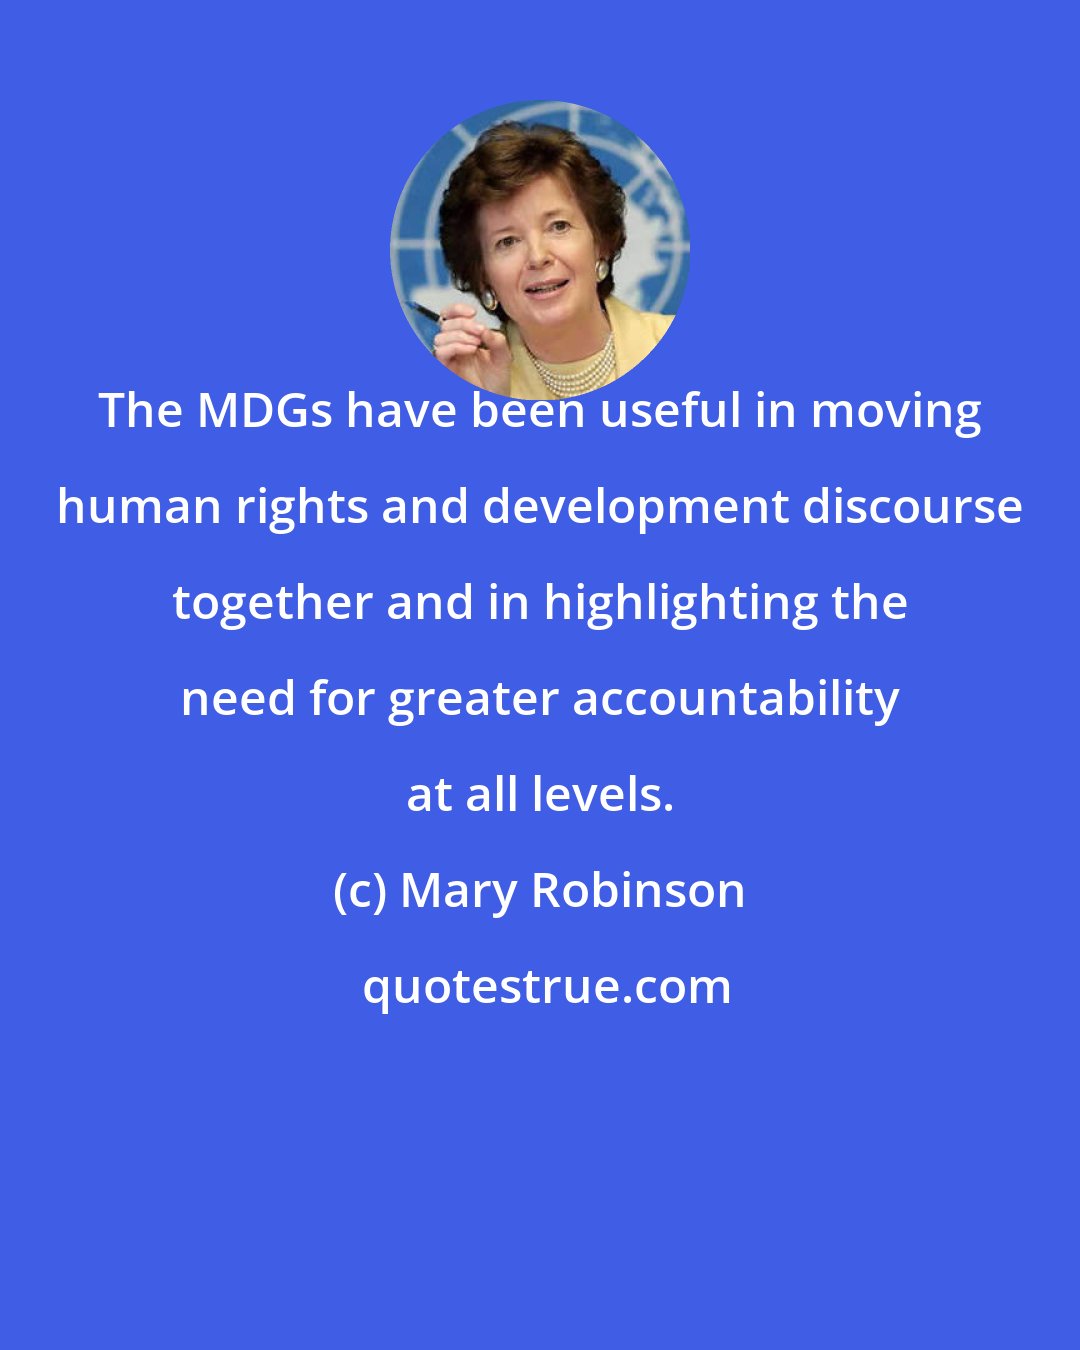 Mary Robinson: The MDGs have been useful in moving human rights and development discourse together and in highlighting the need for greater accountability at all levels.